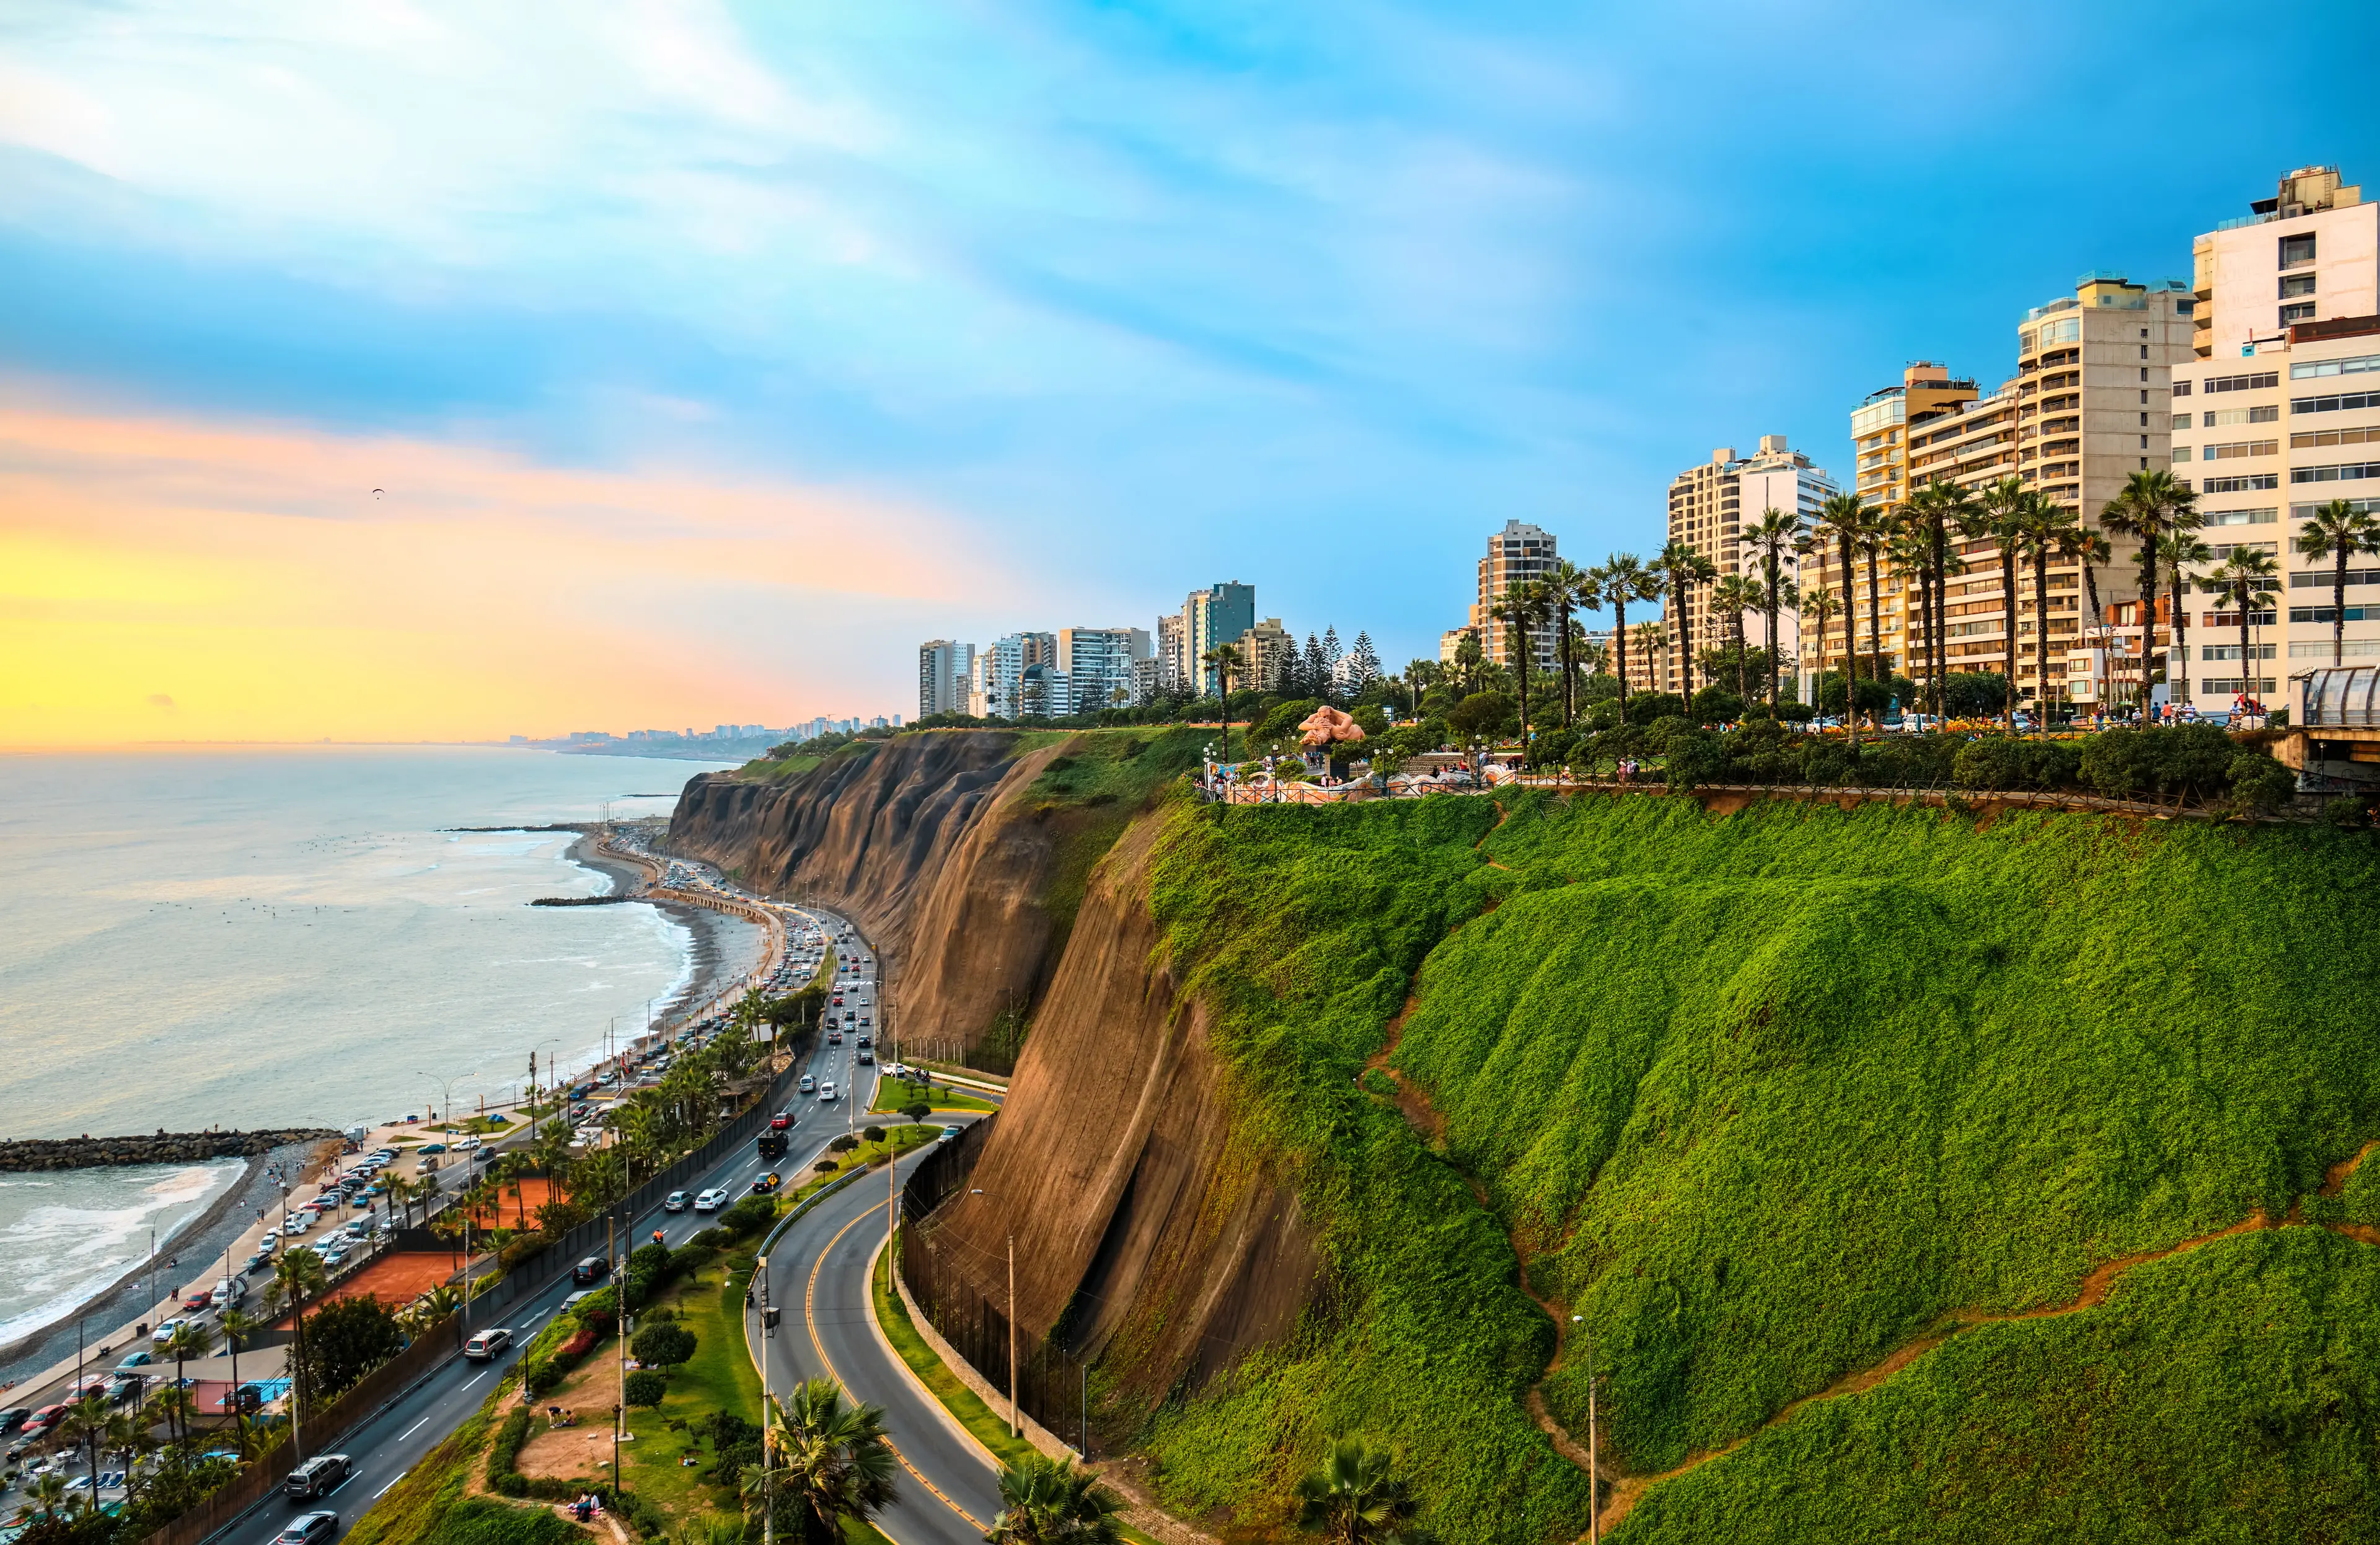 4-Day Family Food, Shopping & Sightseeing Adventure in Lima